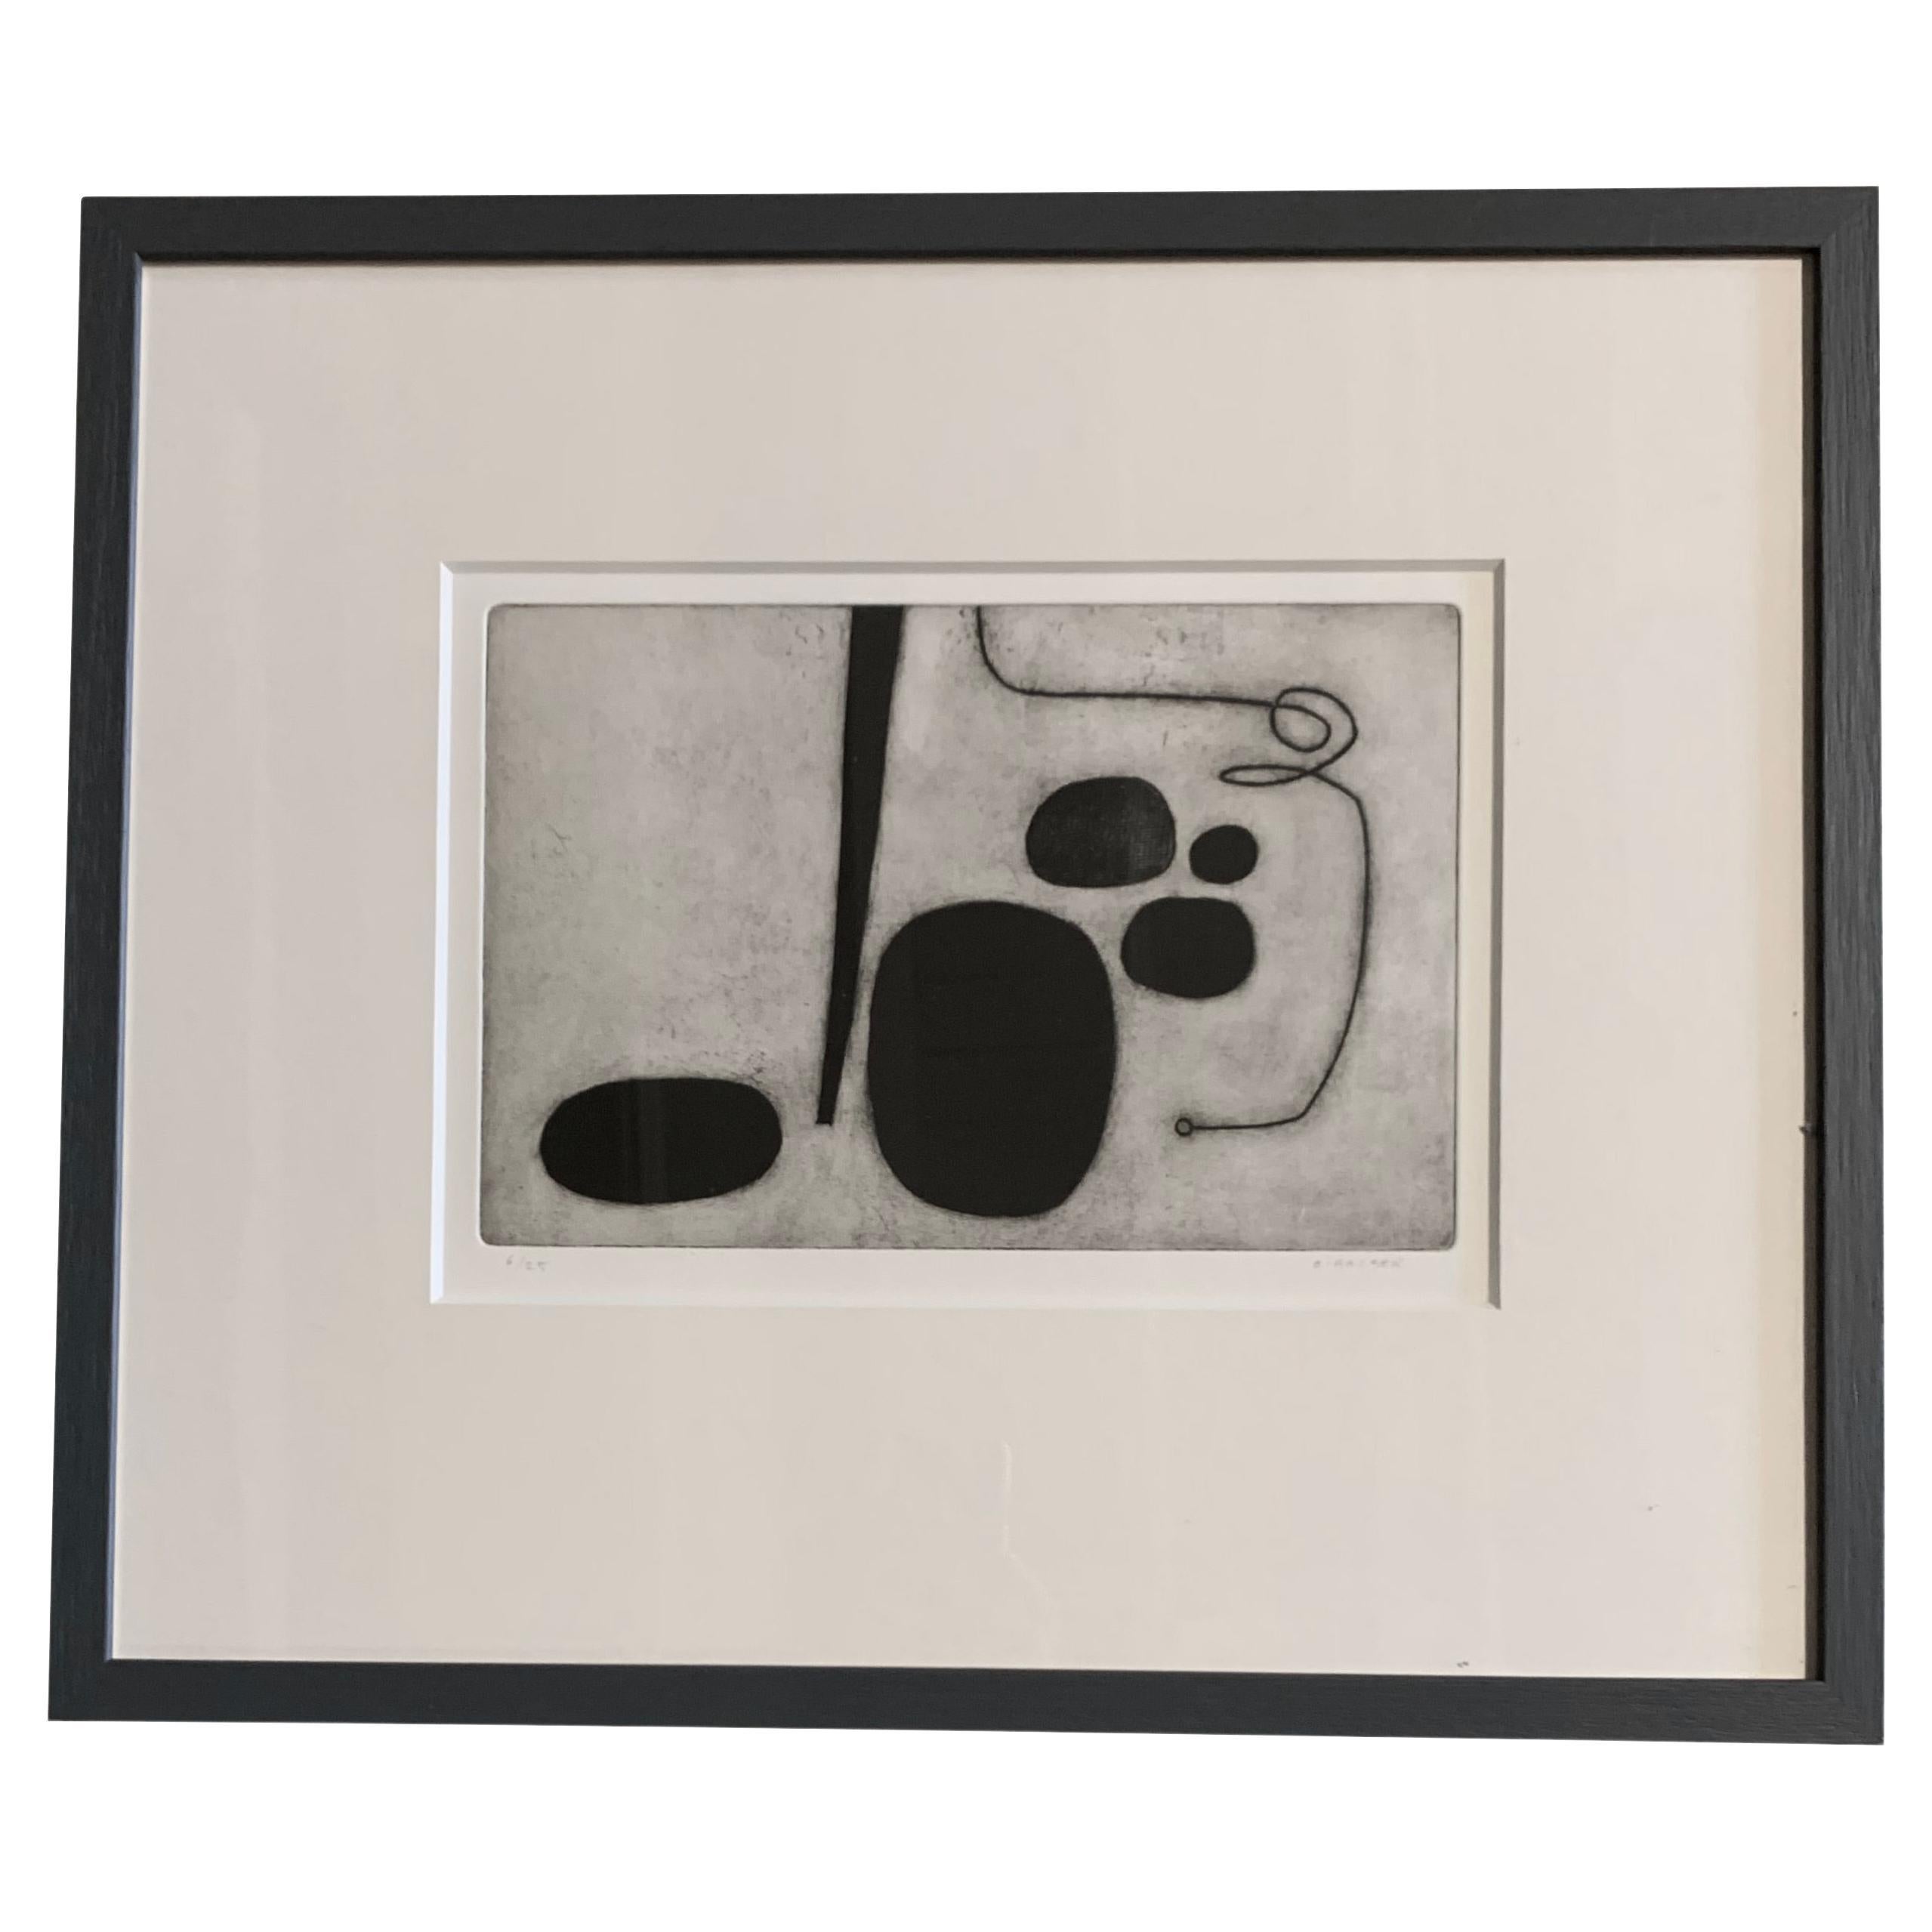 Black And White Abstract Etching By Oliver Gaiger, England, Contemporary